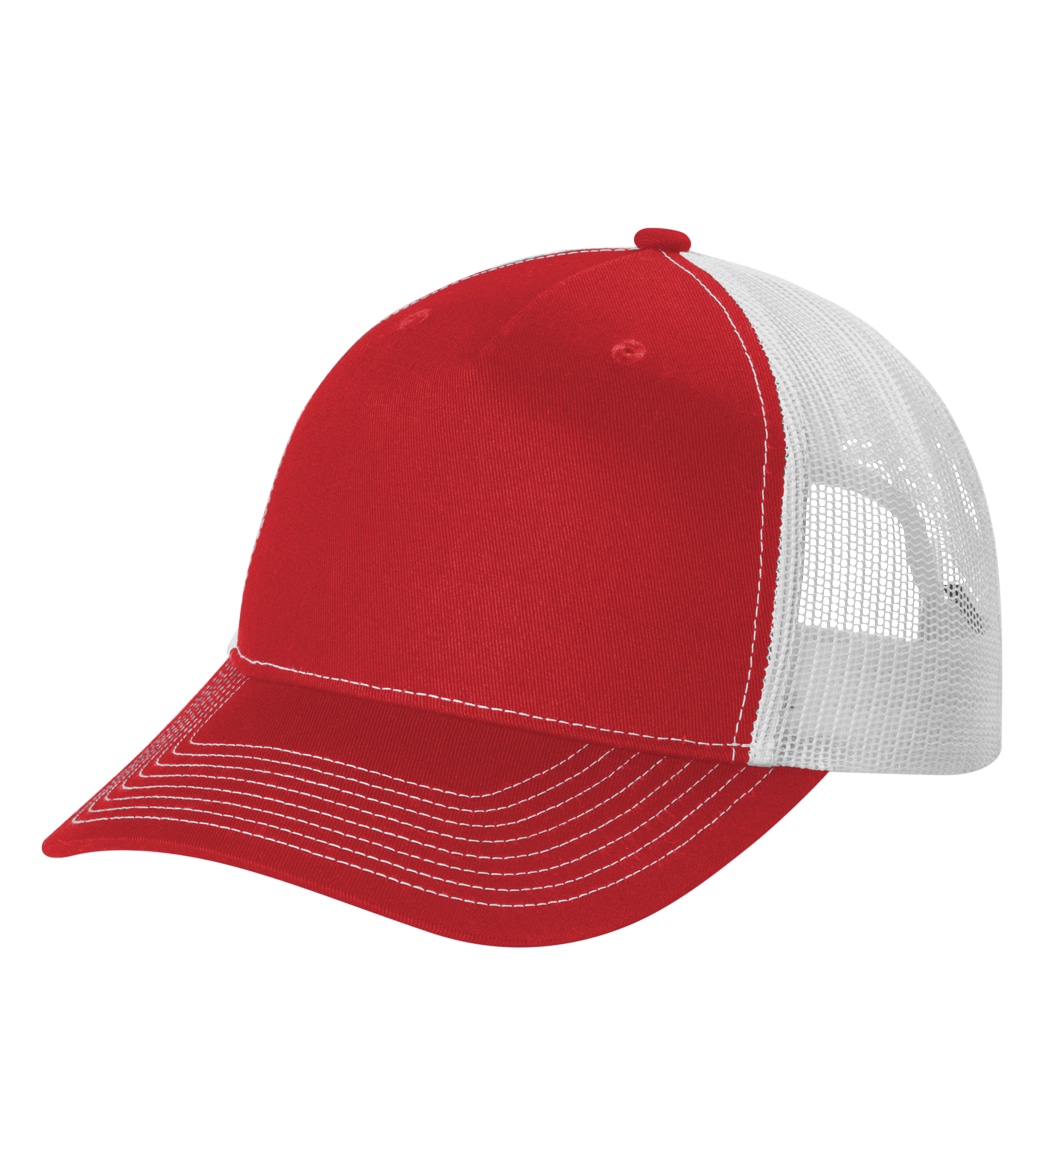 Snapback Trucker Hat - Flame Red/White One Size Cotton/Polyester - Swimoutlet.com